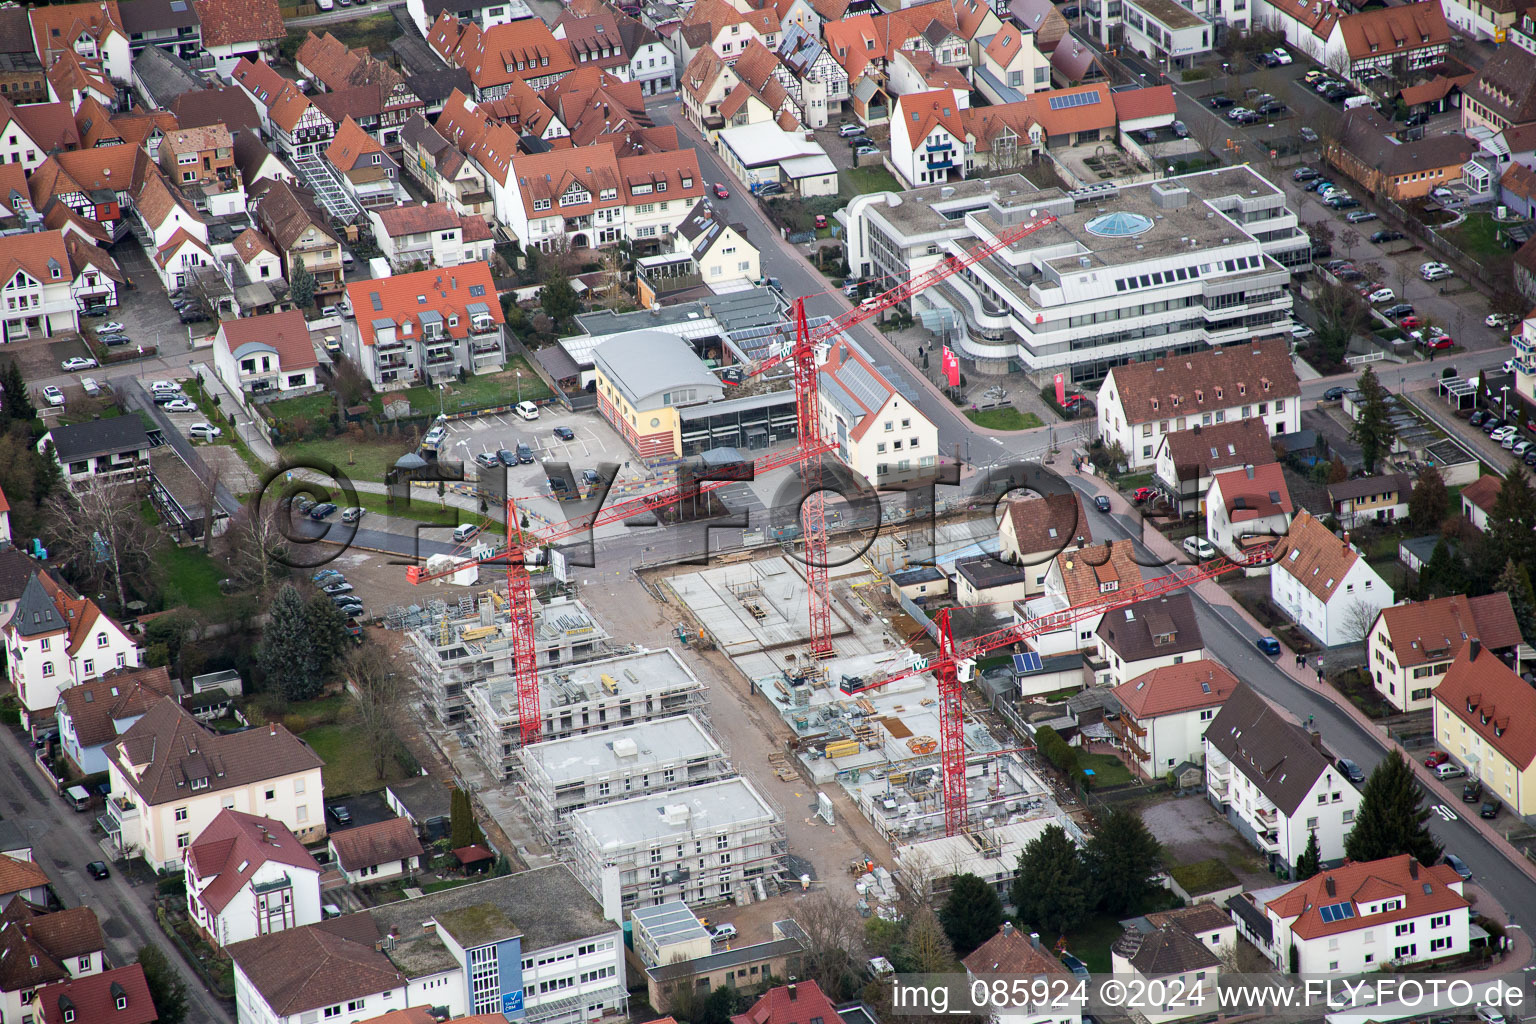 Oblique view of Construction site for City Quarters Building 'Im Stadtkern' in Kandel in the state Rhineland-Palatinate, Germany